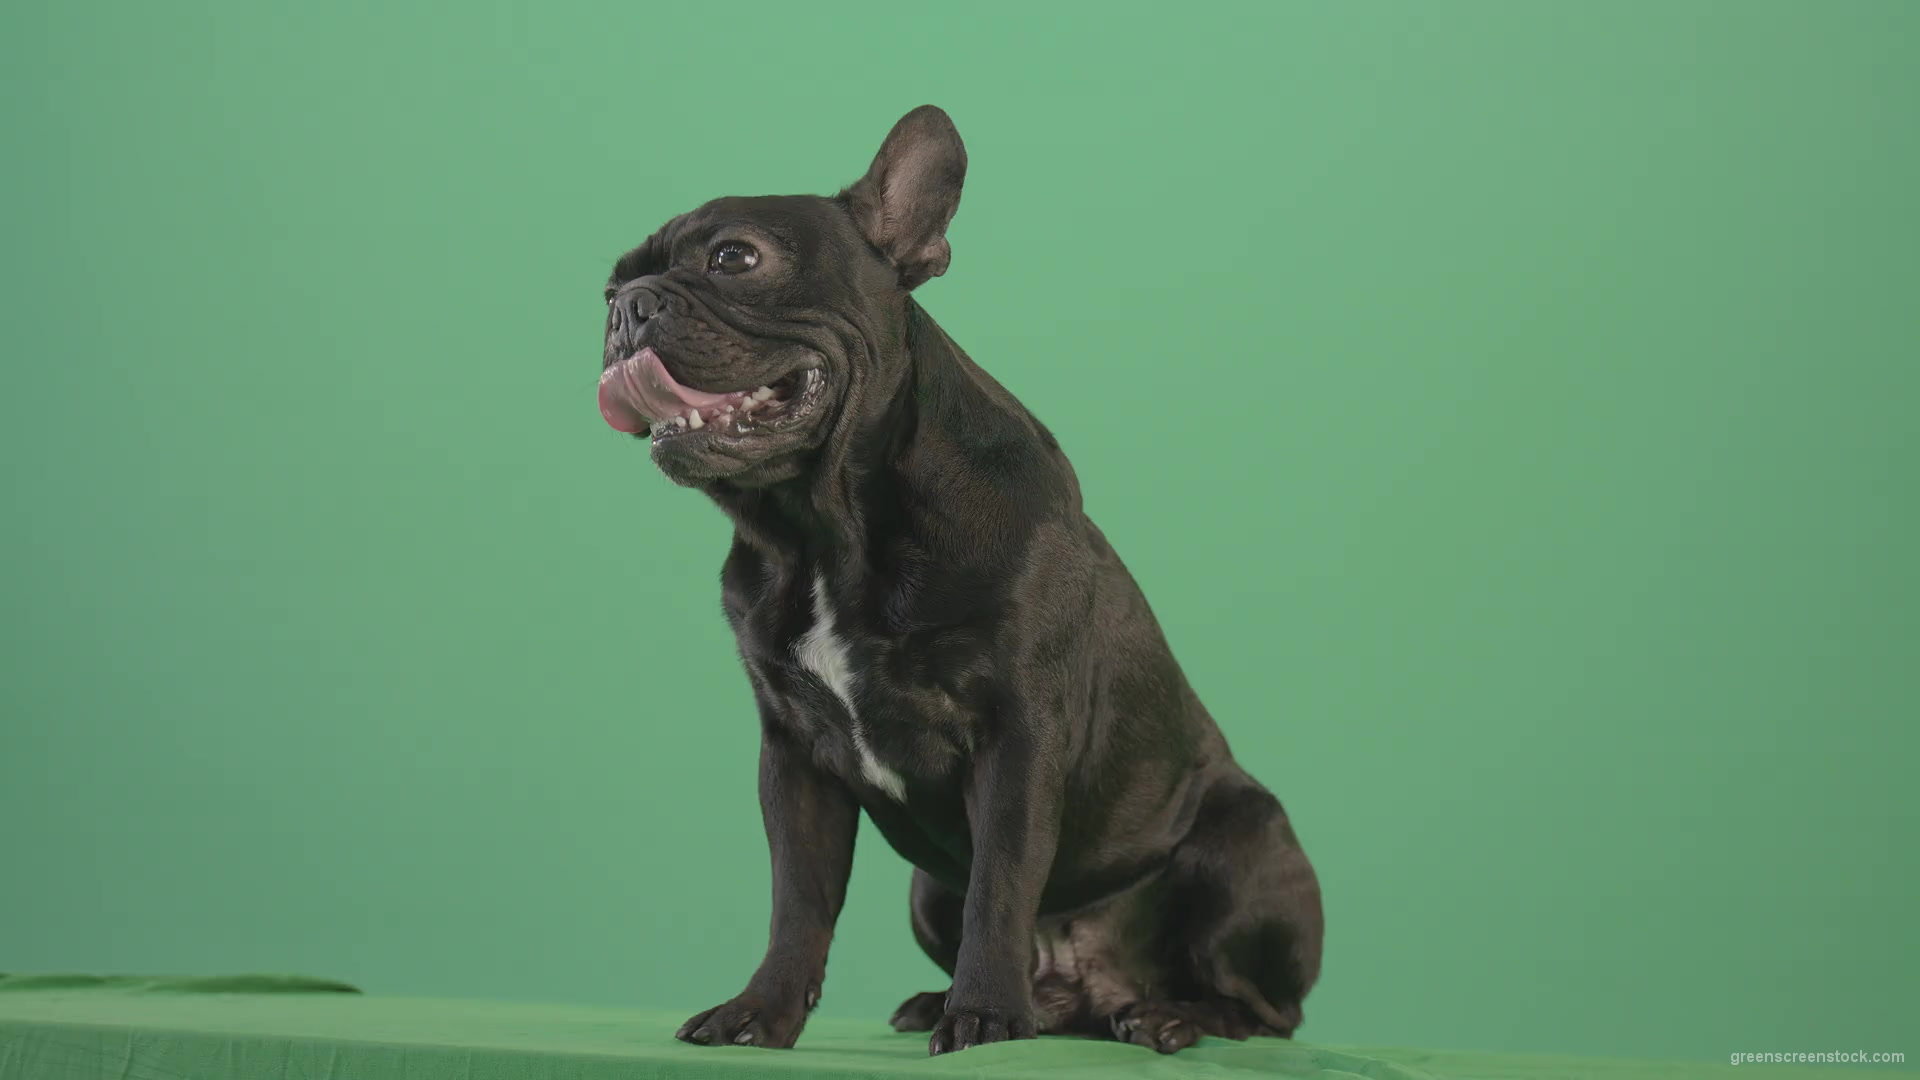 Angra-French-bulldog-black-toy-dog-watch-enemy-over-green-screen-4K-Video-Footage-1920_001 Green Screen Stock